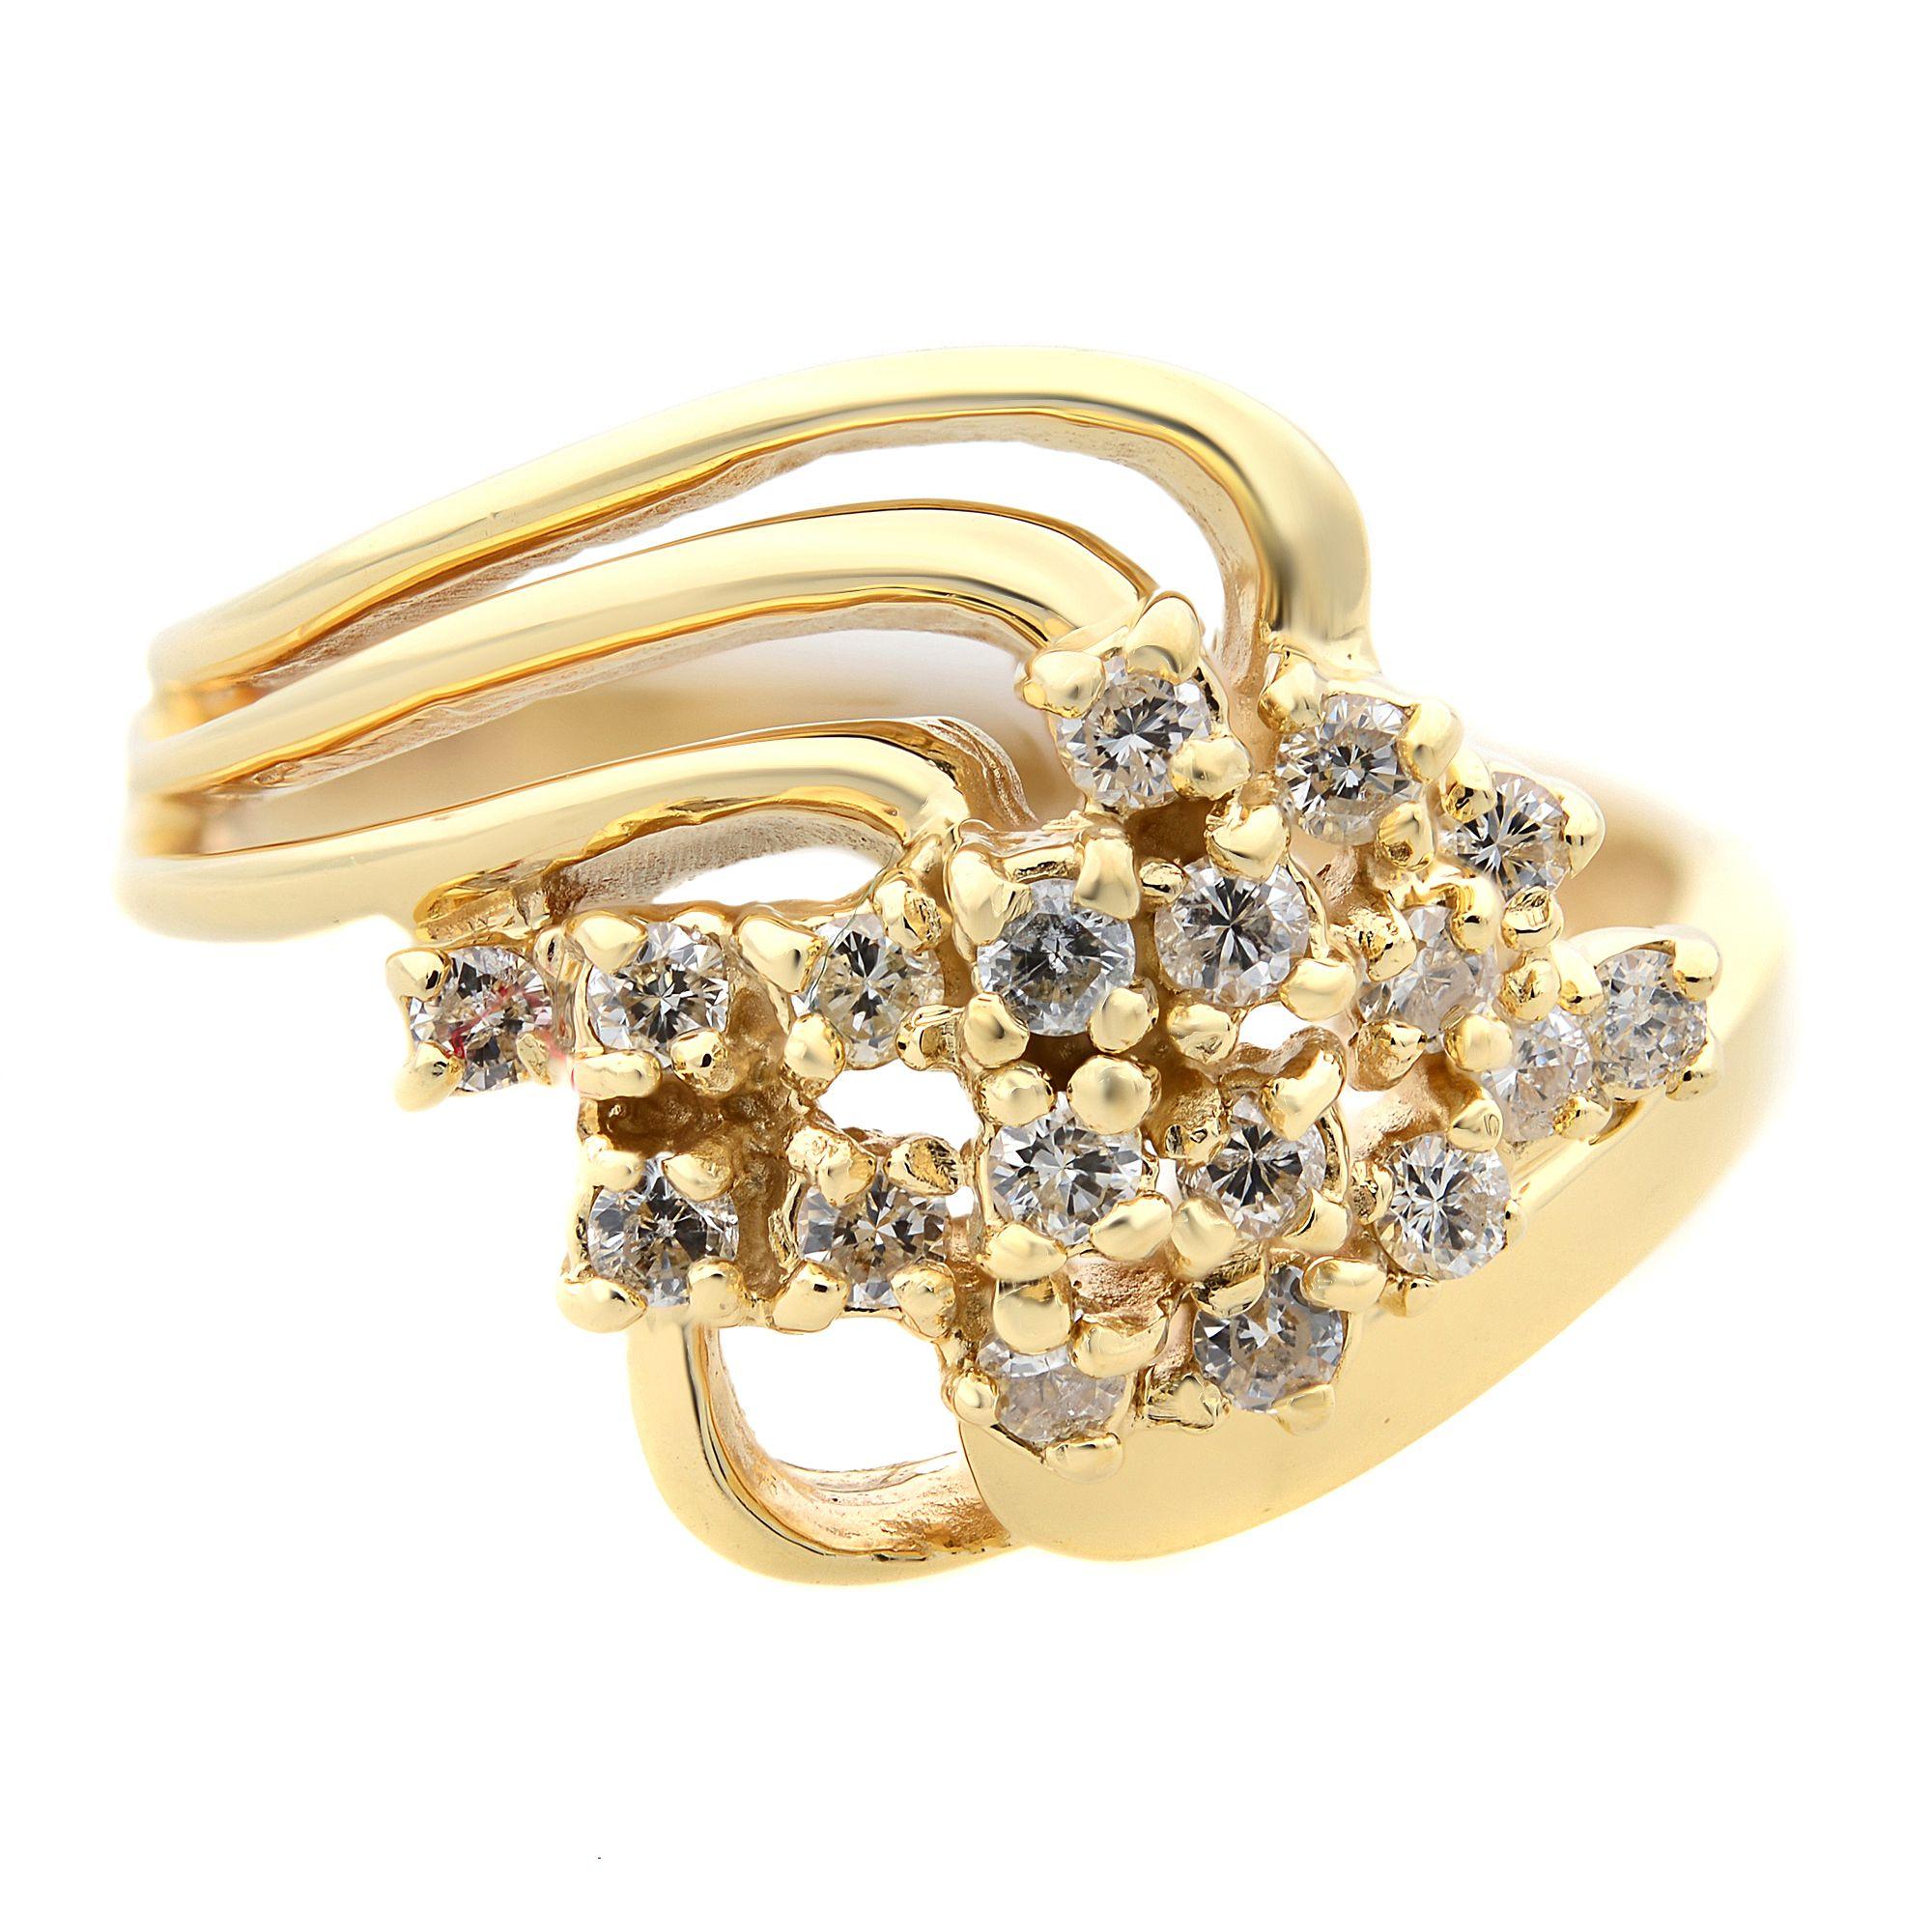 Shimmering round cut diamonds are the focal point of this dazzling ladies diamond cocktail right hand ring. This ring is crafted in solid 14 karat yellow gold. It features a cluster of prong set round diamonds on a bypass setting. If you are in the